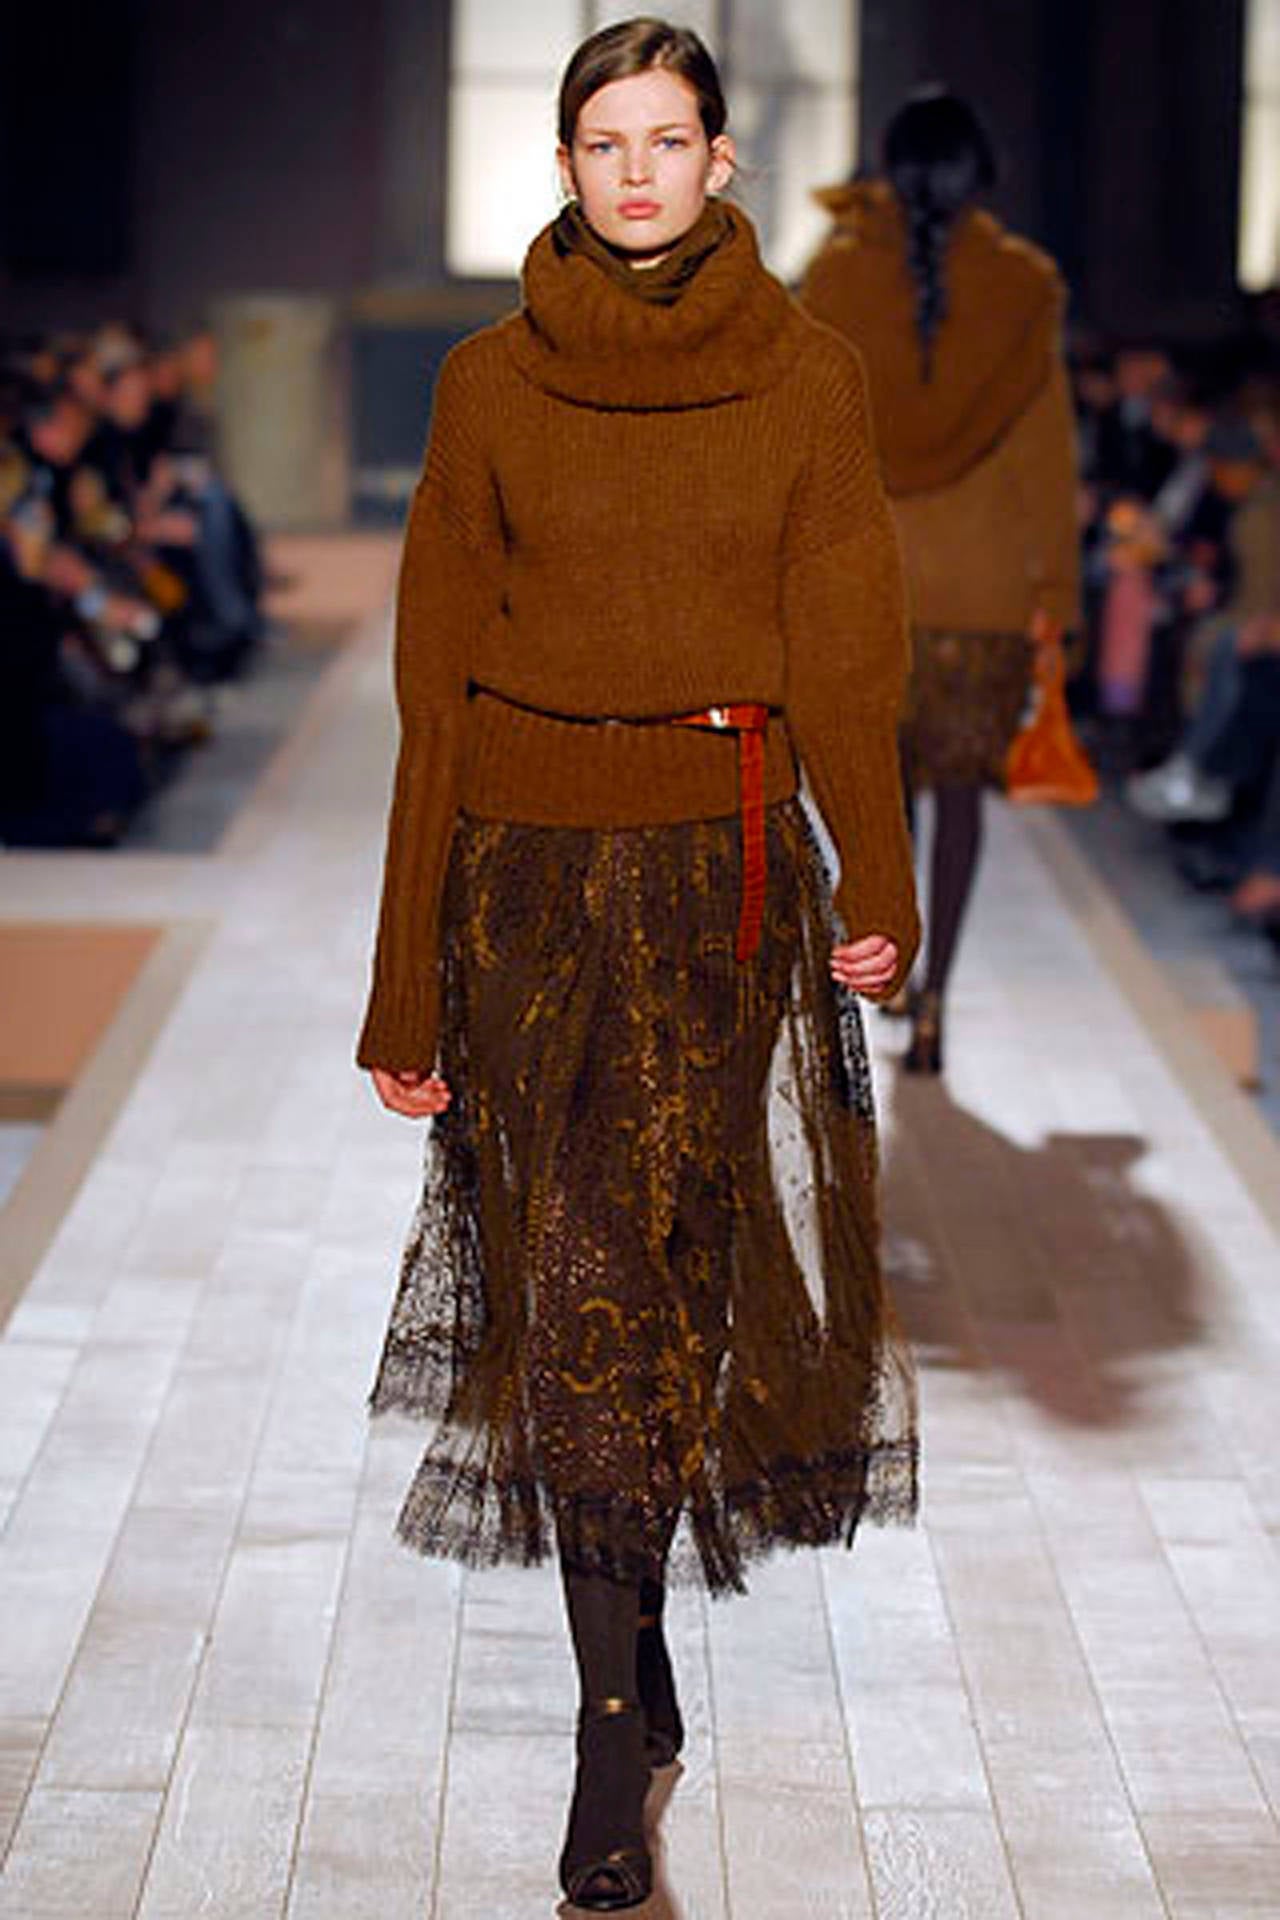 Hermes Lace Skirt with Hermes Logo by Gaultier - Runway  1